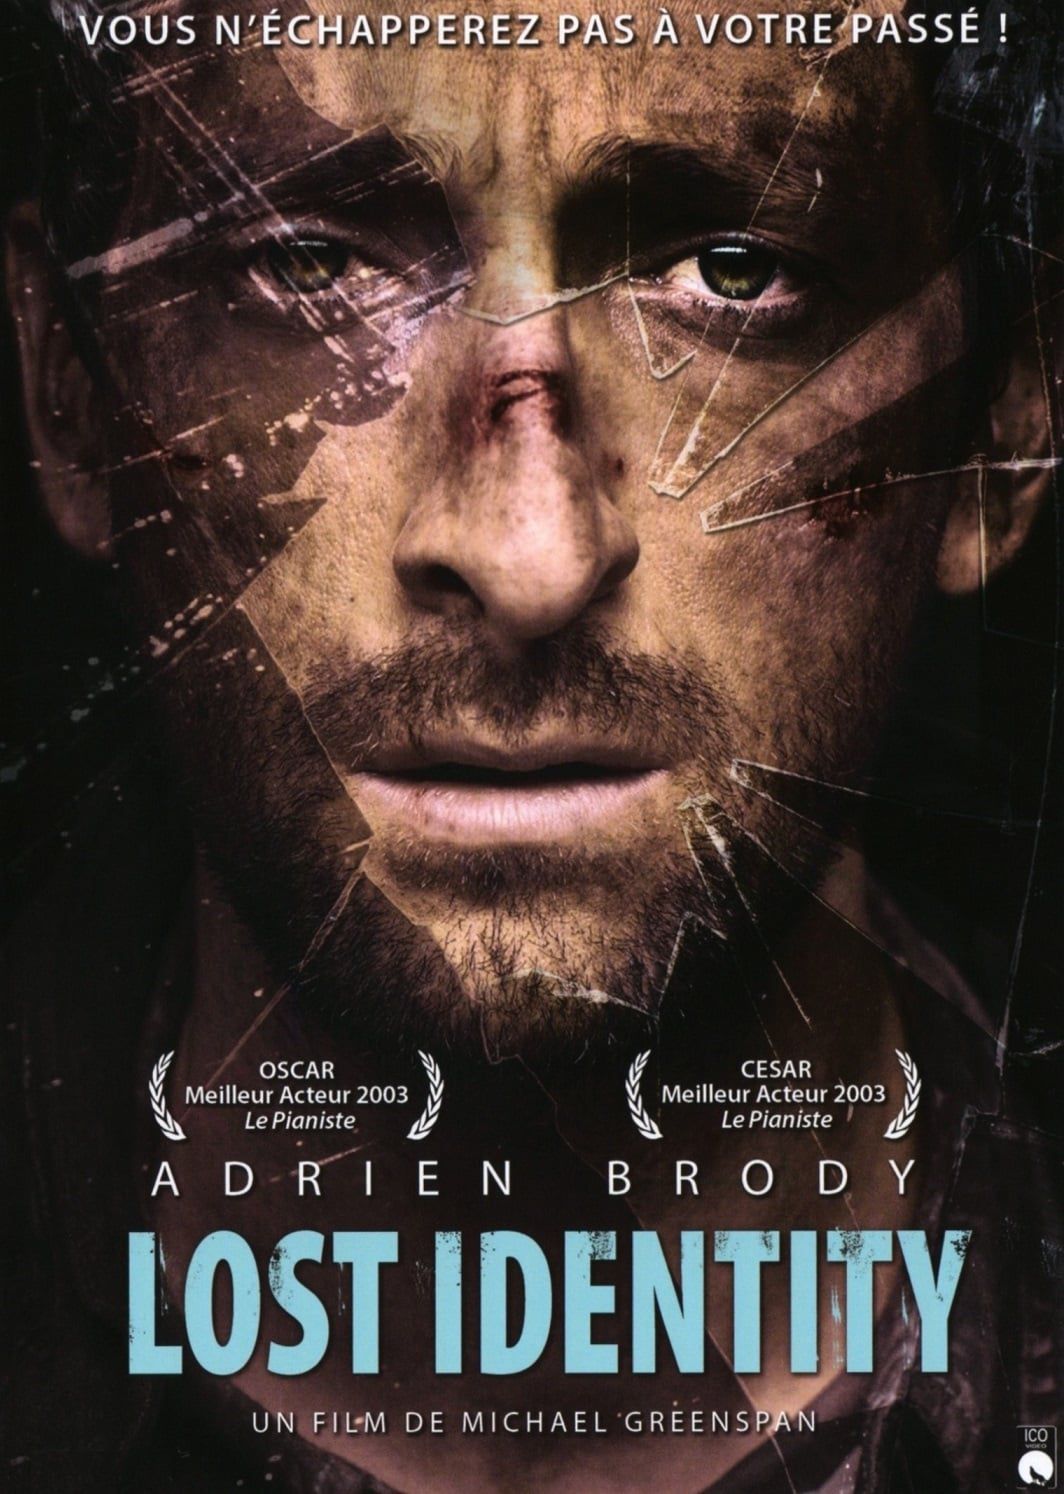 Lost Identity - Film (2011) streaming VF gratuit complet